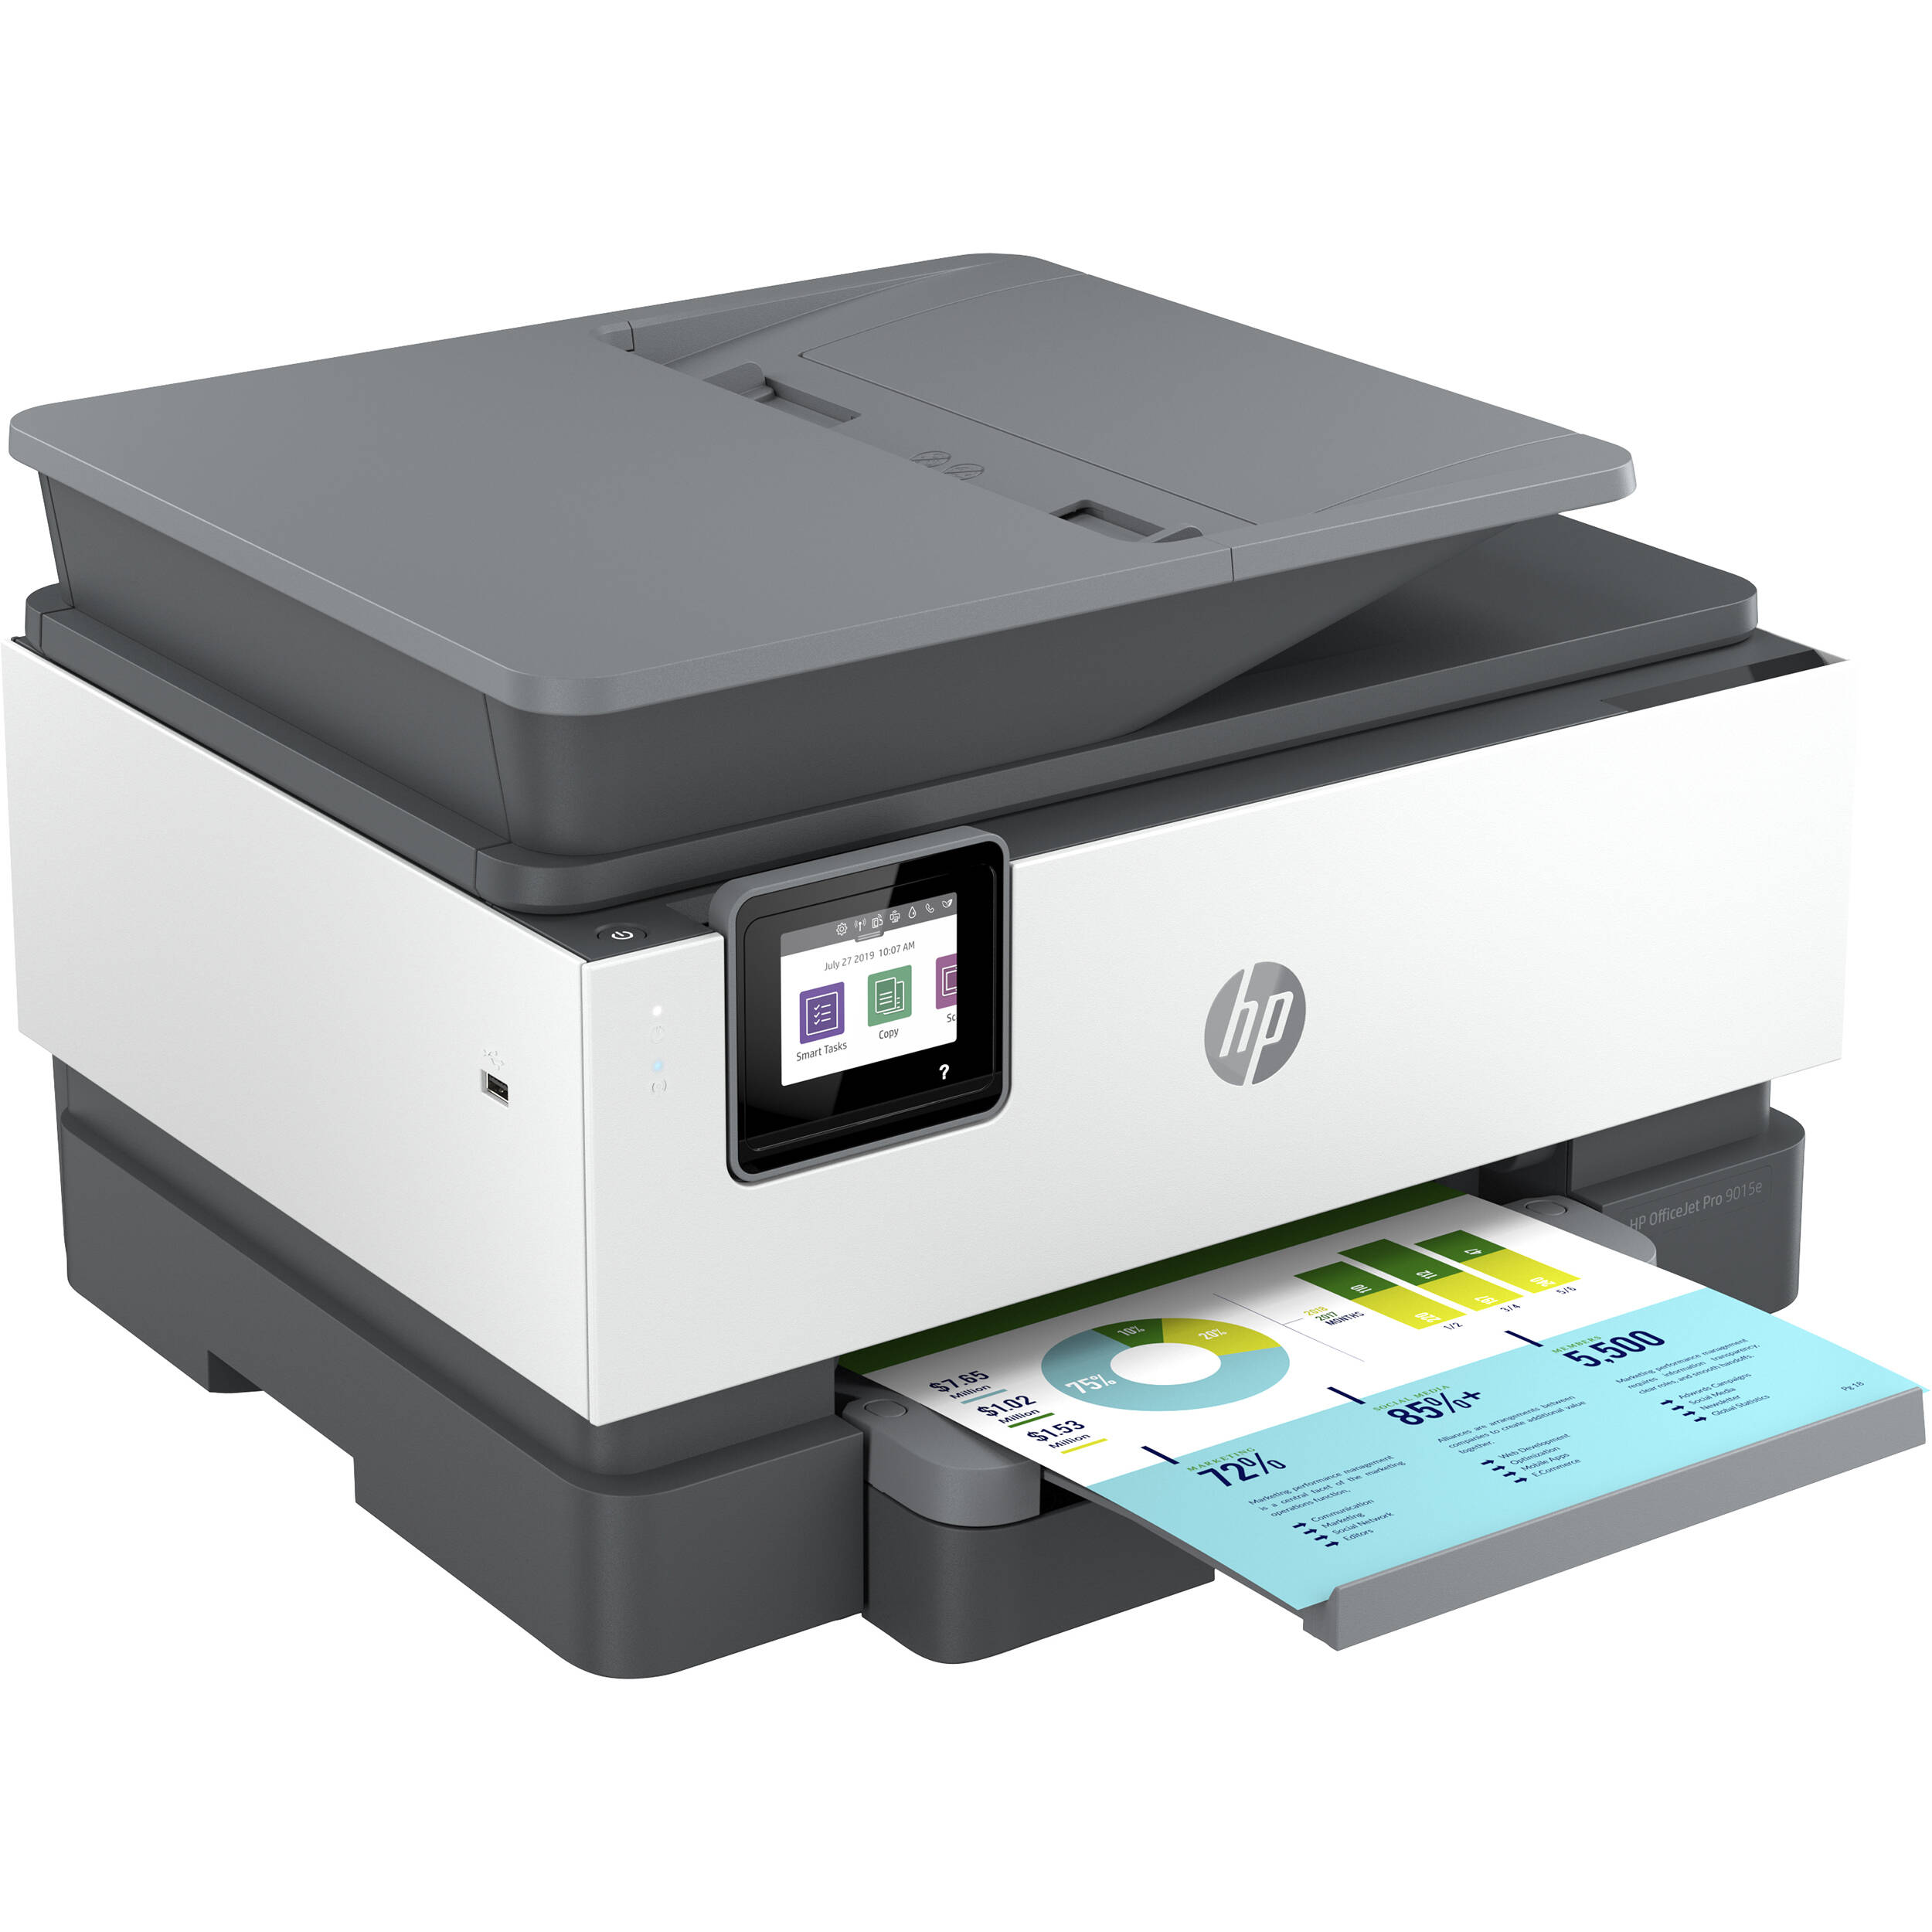 HP HP-OJPRO9015E-RB OfficeJet Pro 9015e Wireless Color All-in-One Printer - Refurbished